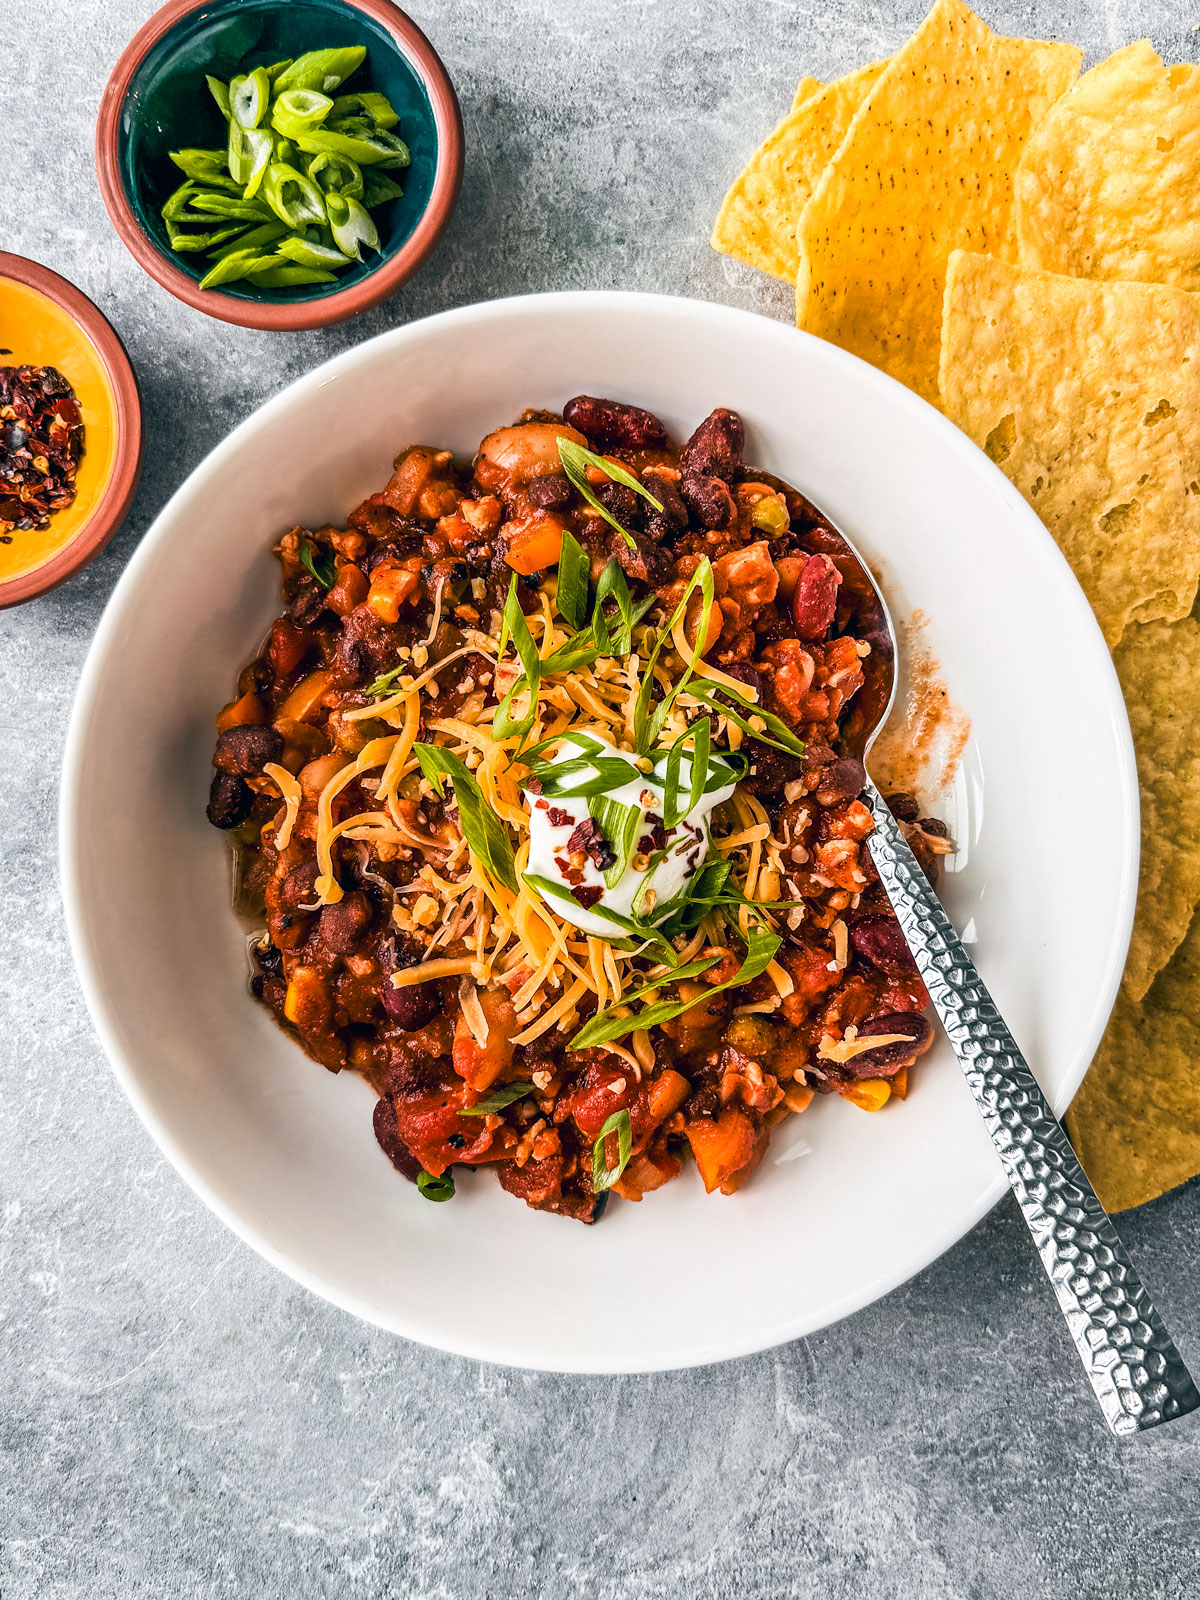 Bowl of chili topped with plain greek yogurt, cheese, and scallions next to a pile of tortilla chips.